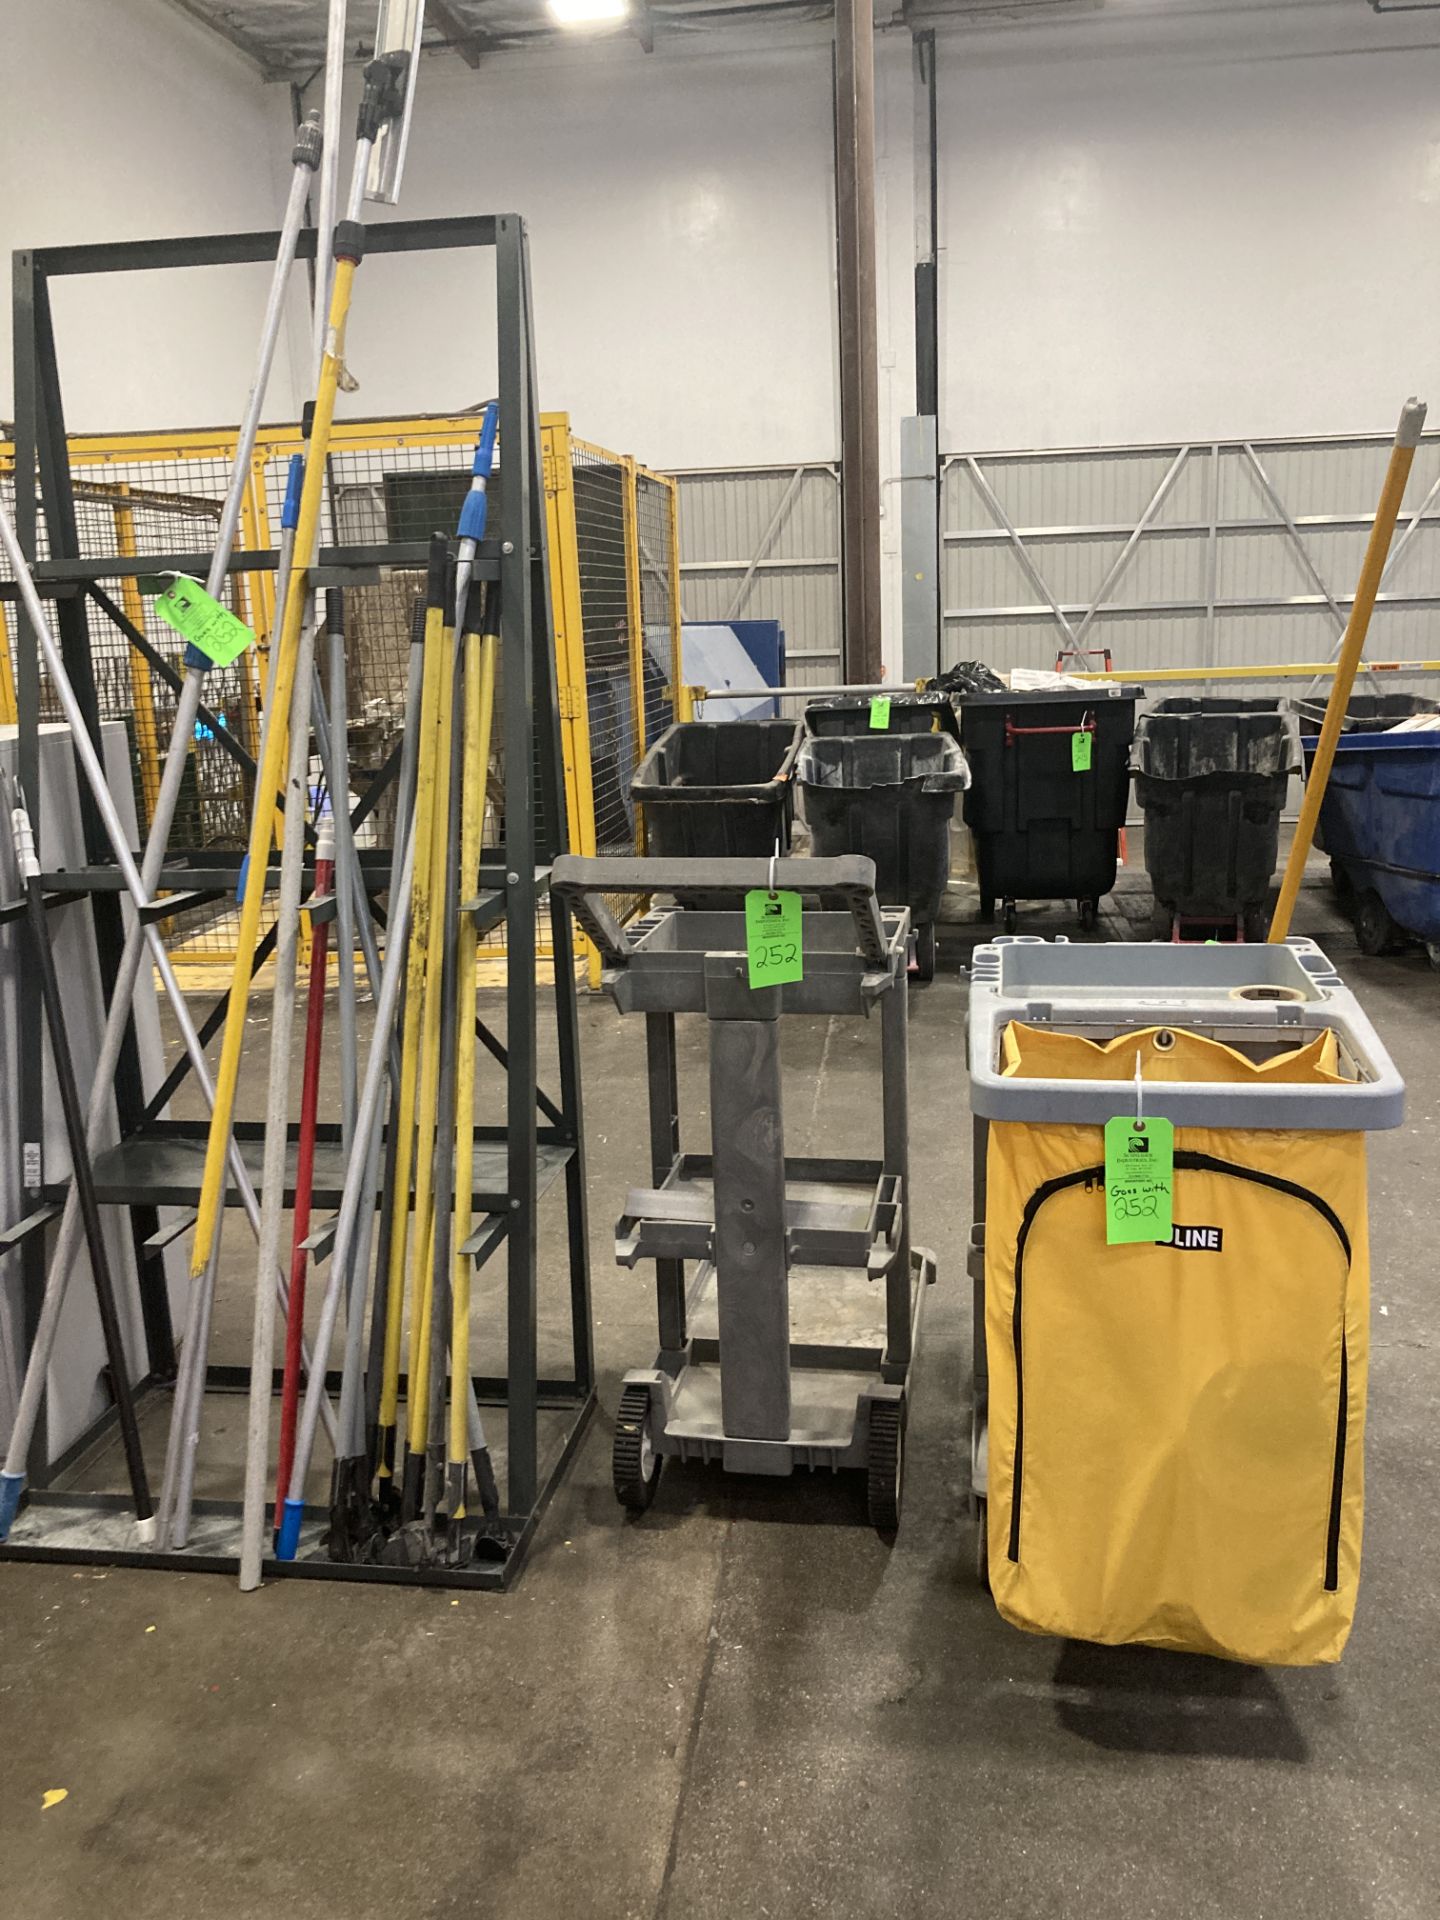 LOT OF pipe shelf unit with content and 2 cleaning push carts Rigging Fee: $ 125